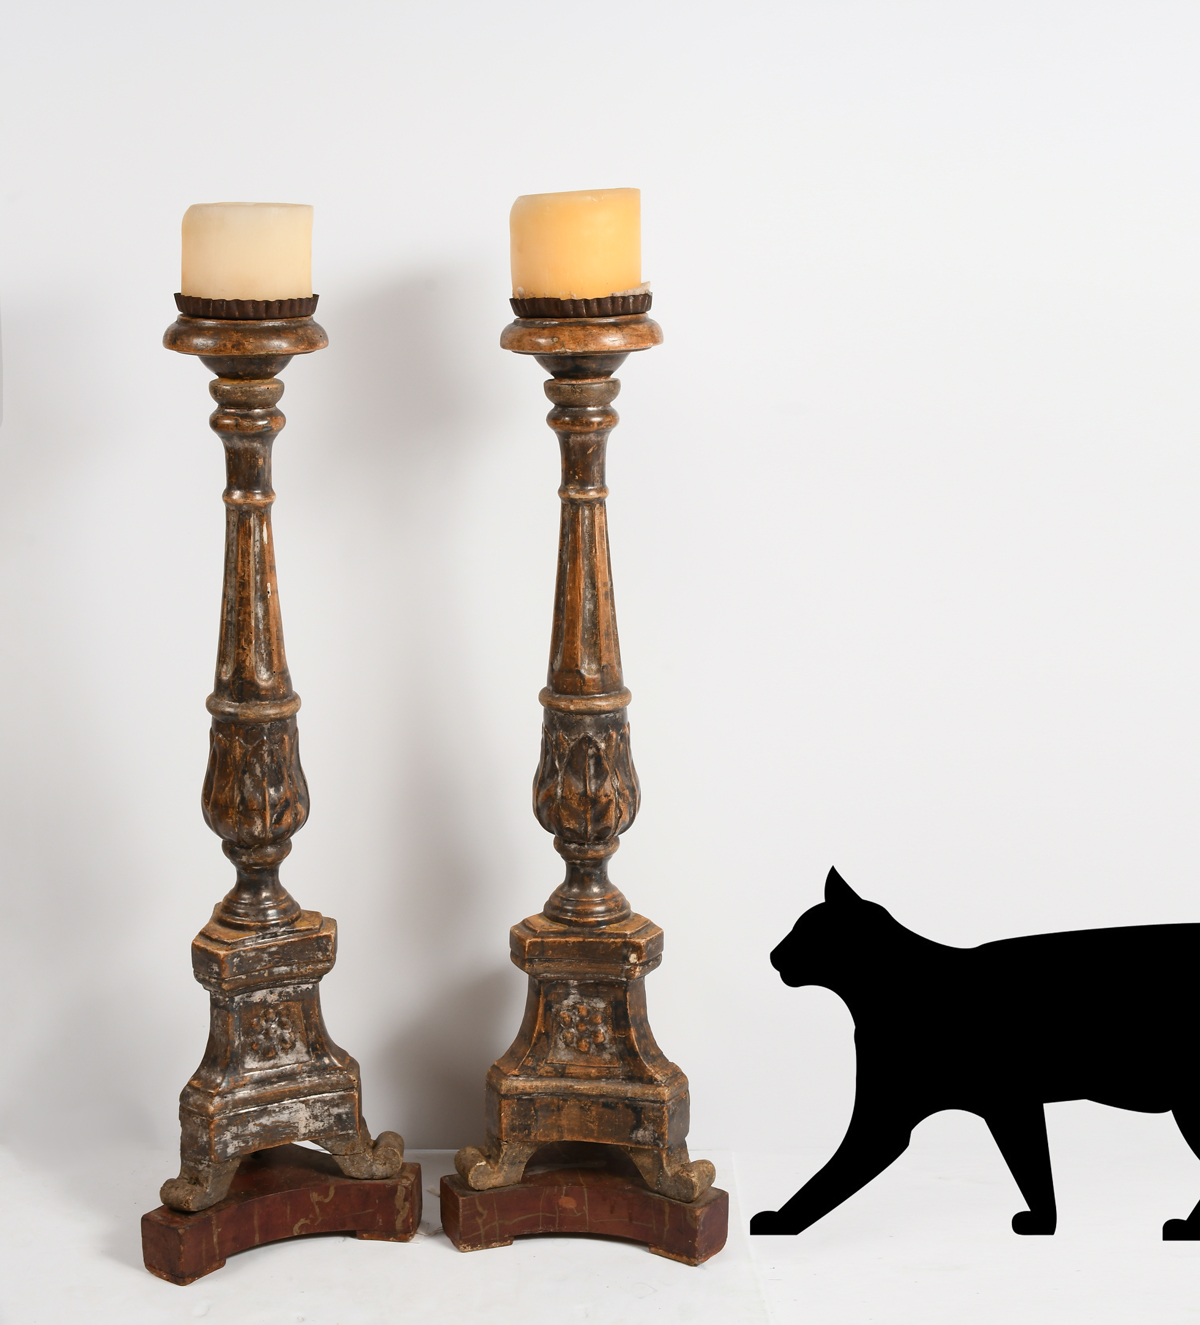 EARLY CARVED SPANISH COLONIAL CANDLESTICKS: